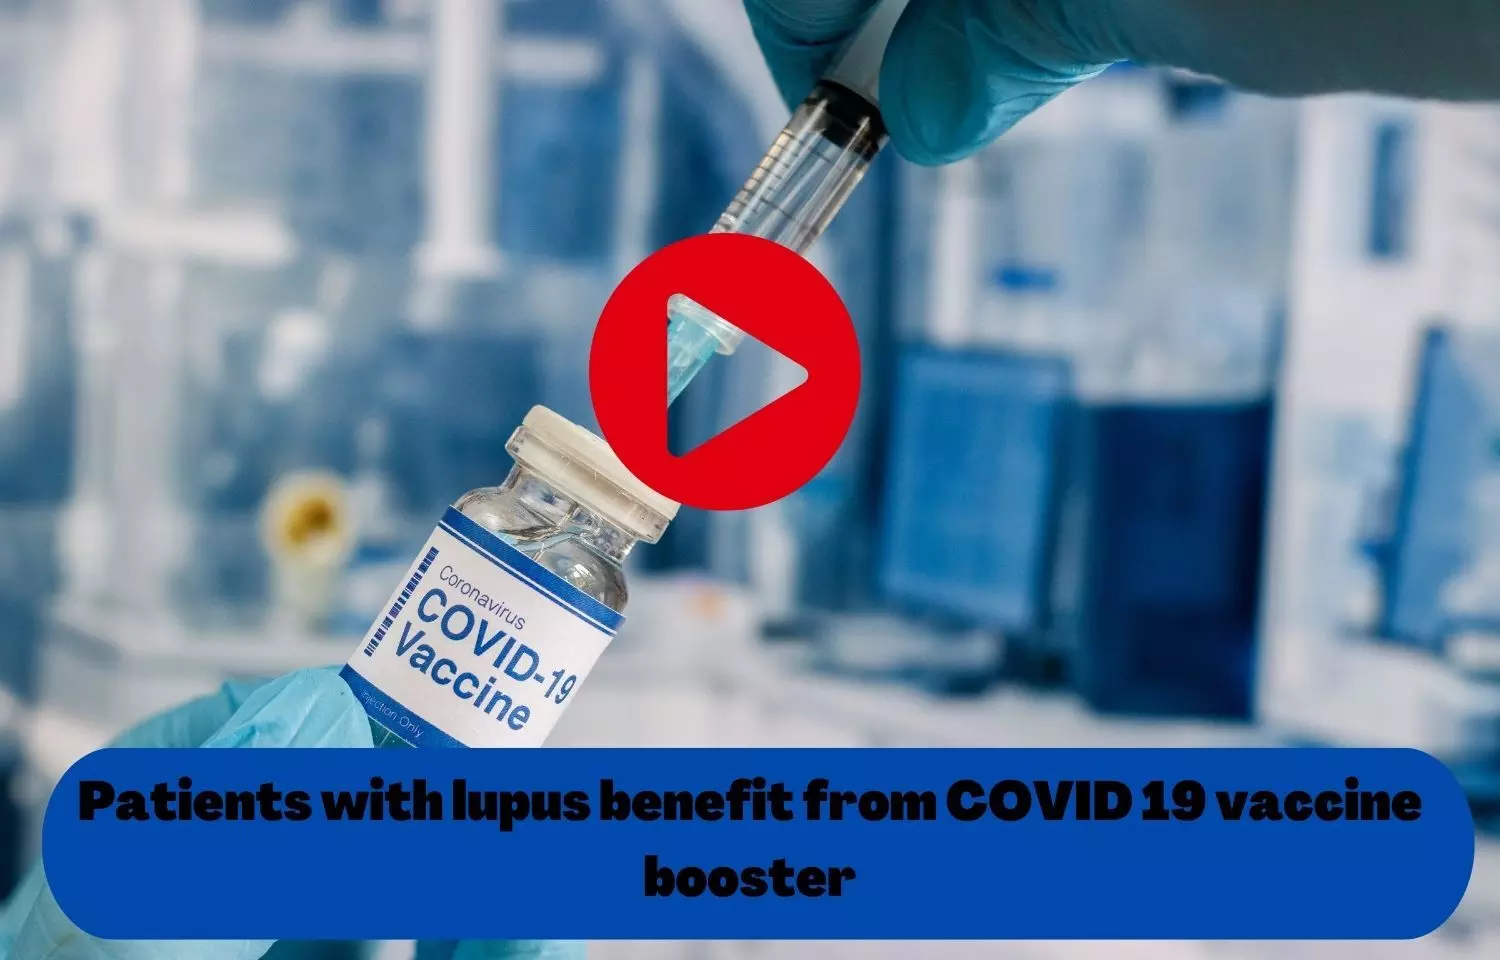 Patients with lupus benefit from COVID 19 vaccine booster